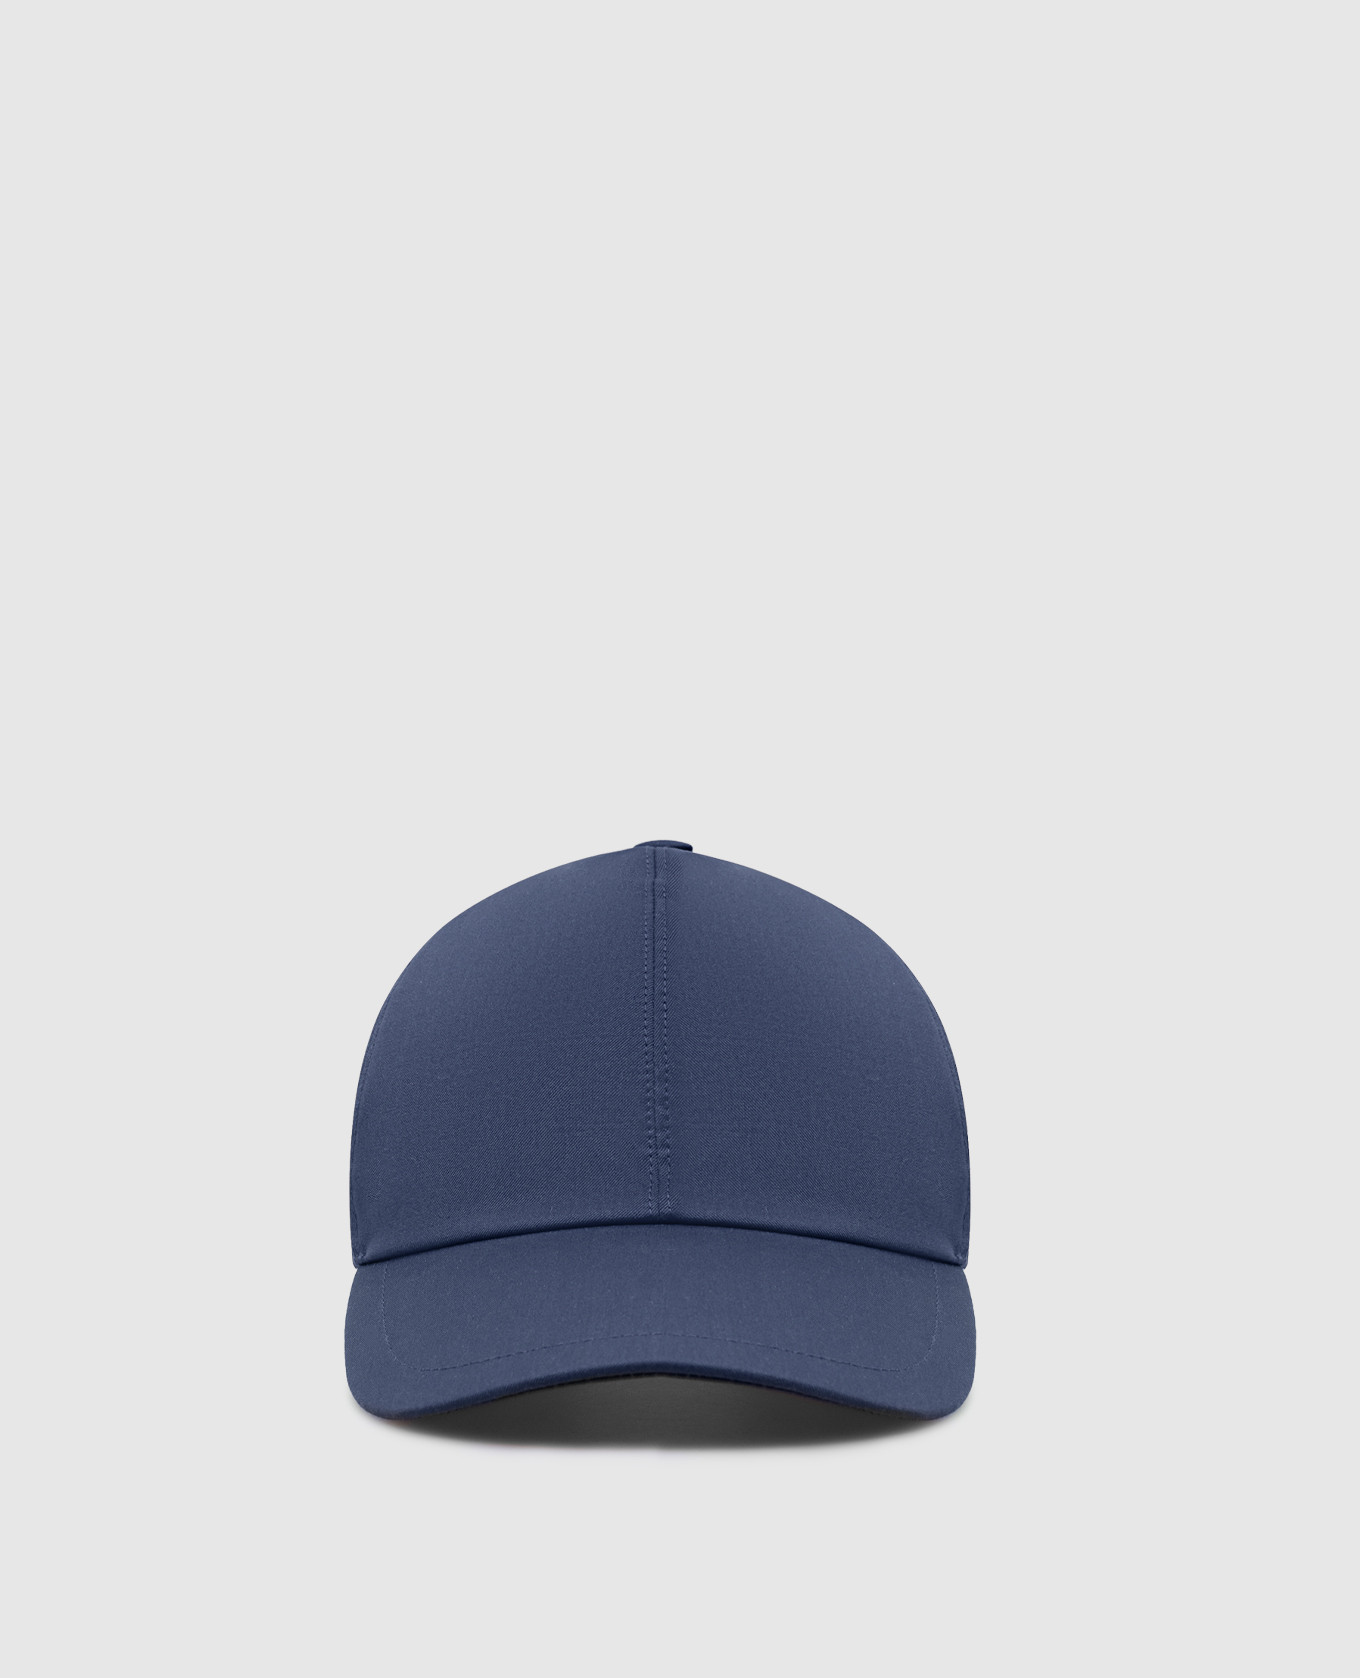 Blue cap made of wool with a logo